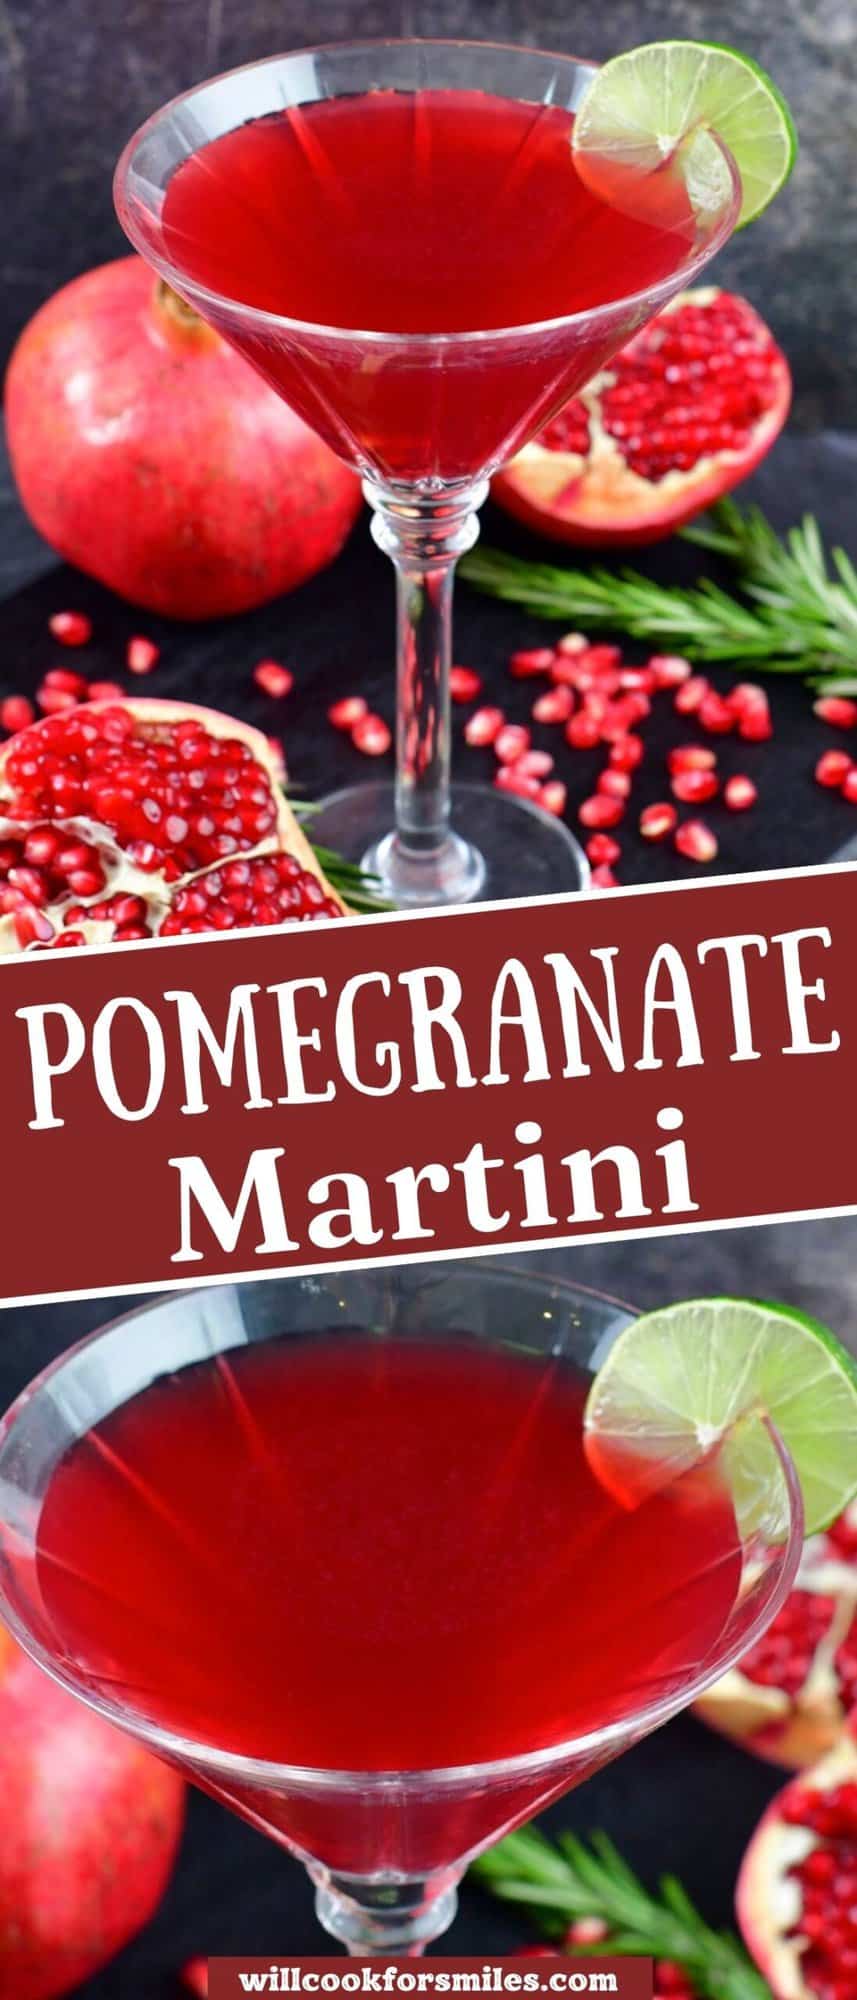 collage of two images of pomegranate martini and title.